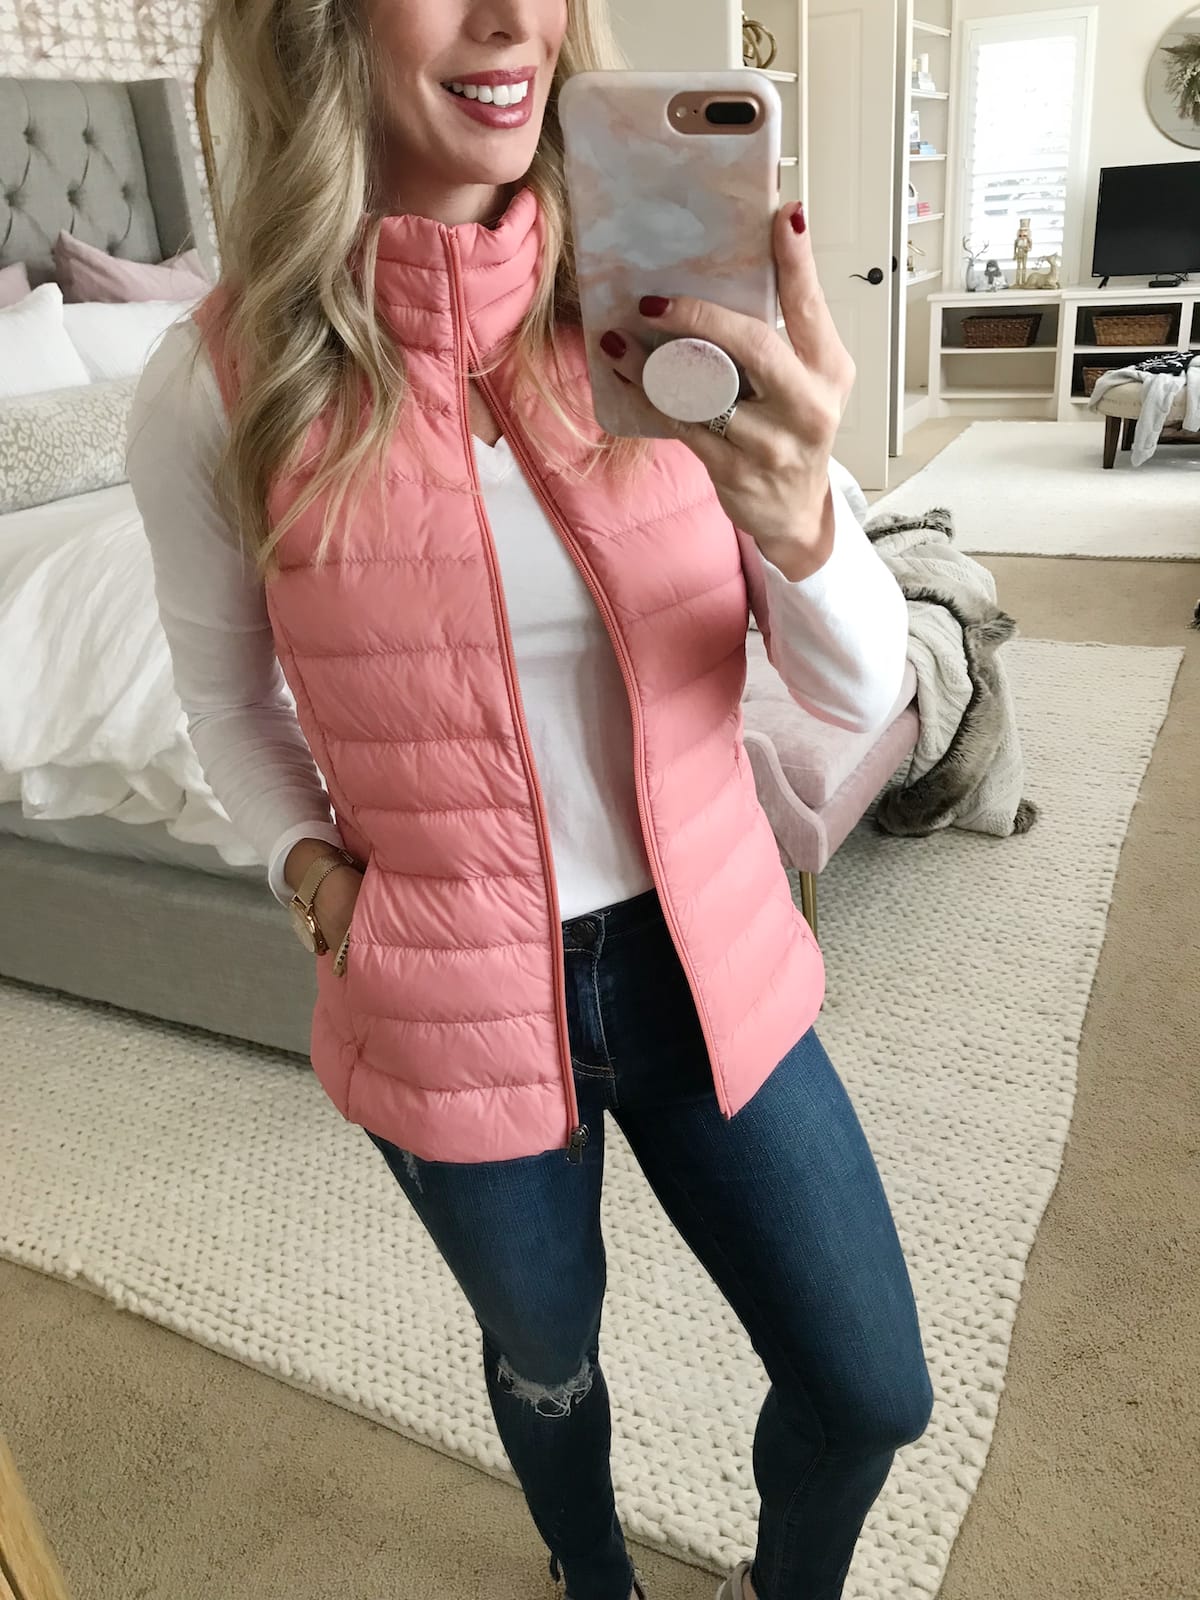 Amazon Fashion Haul - jeans and pink puffer vest (1)